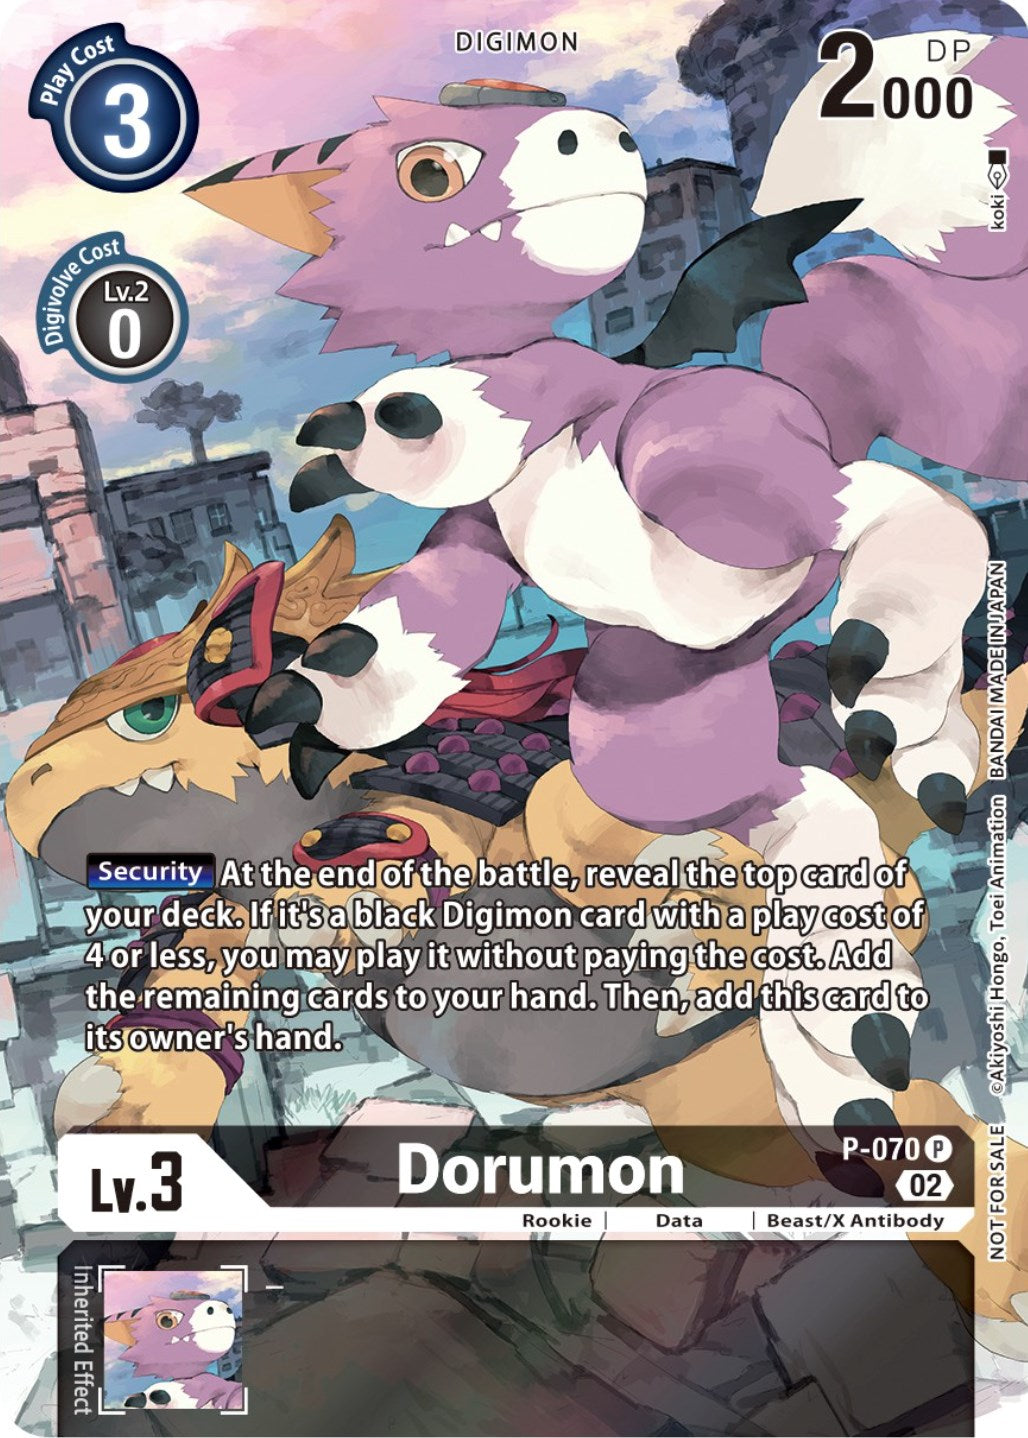 Dorumon [P-070] (Official Tournament Pack Vol. 10) [Promotional Cards] | Mindsight Gaming